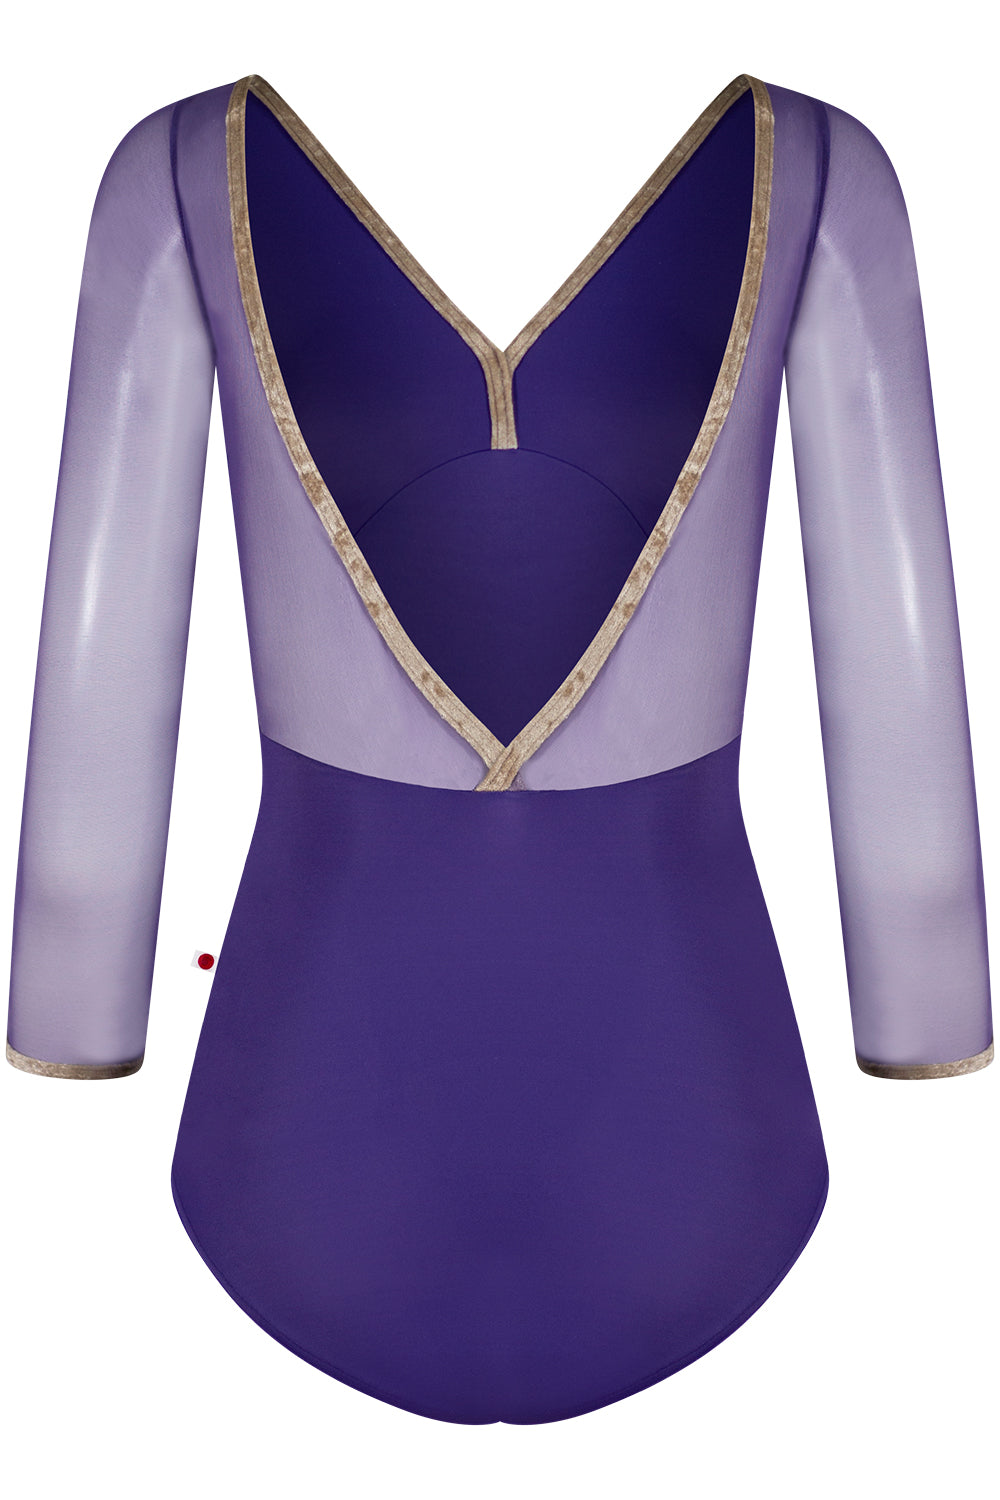 Alicia leotard in T-Myth body and top color with Mesh Fortune 3Q Sleeves and CV-Toffee trim color